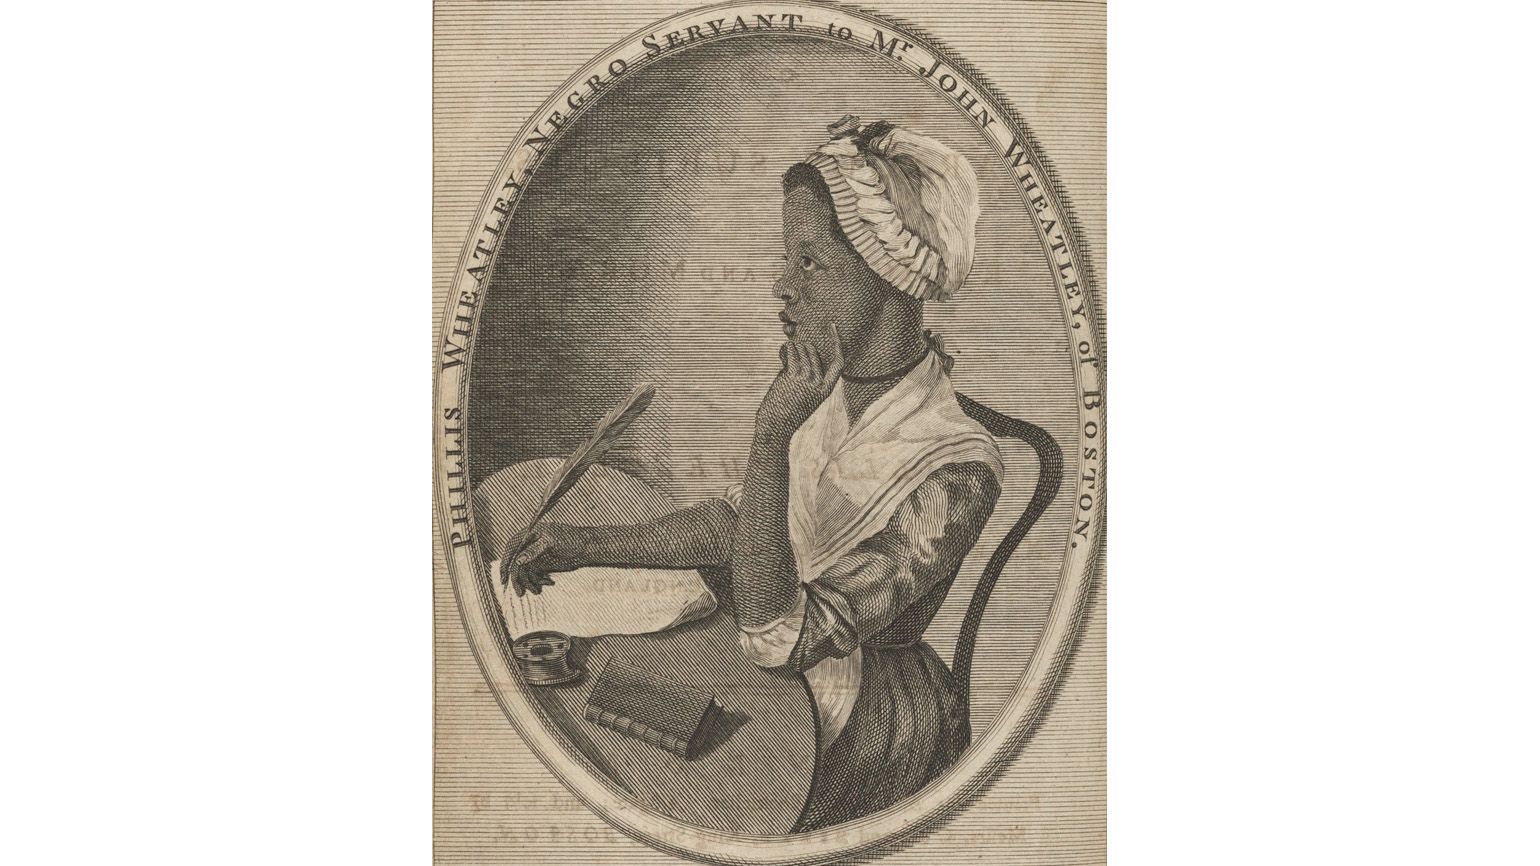 Illustration of Phillis Wheatley writing as an inspiring figure for Black History Month